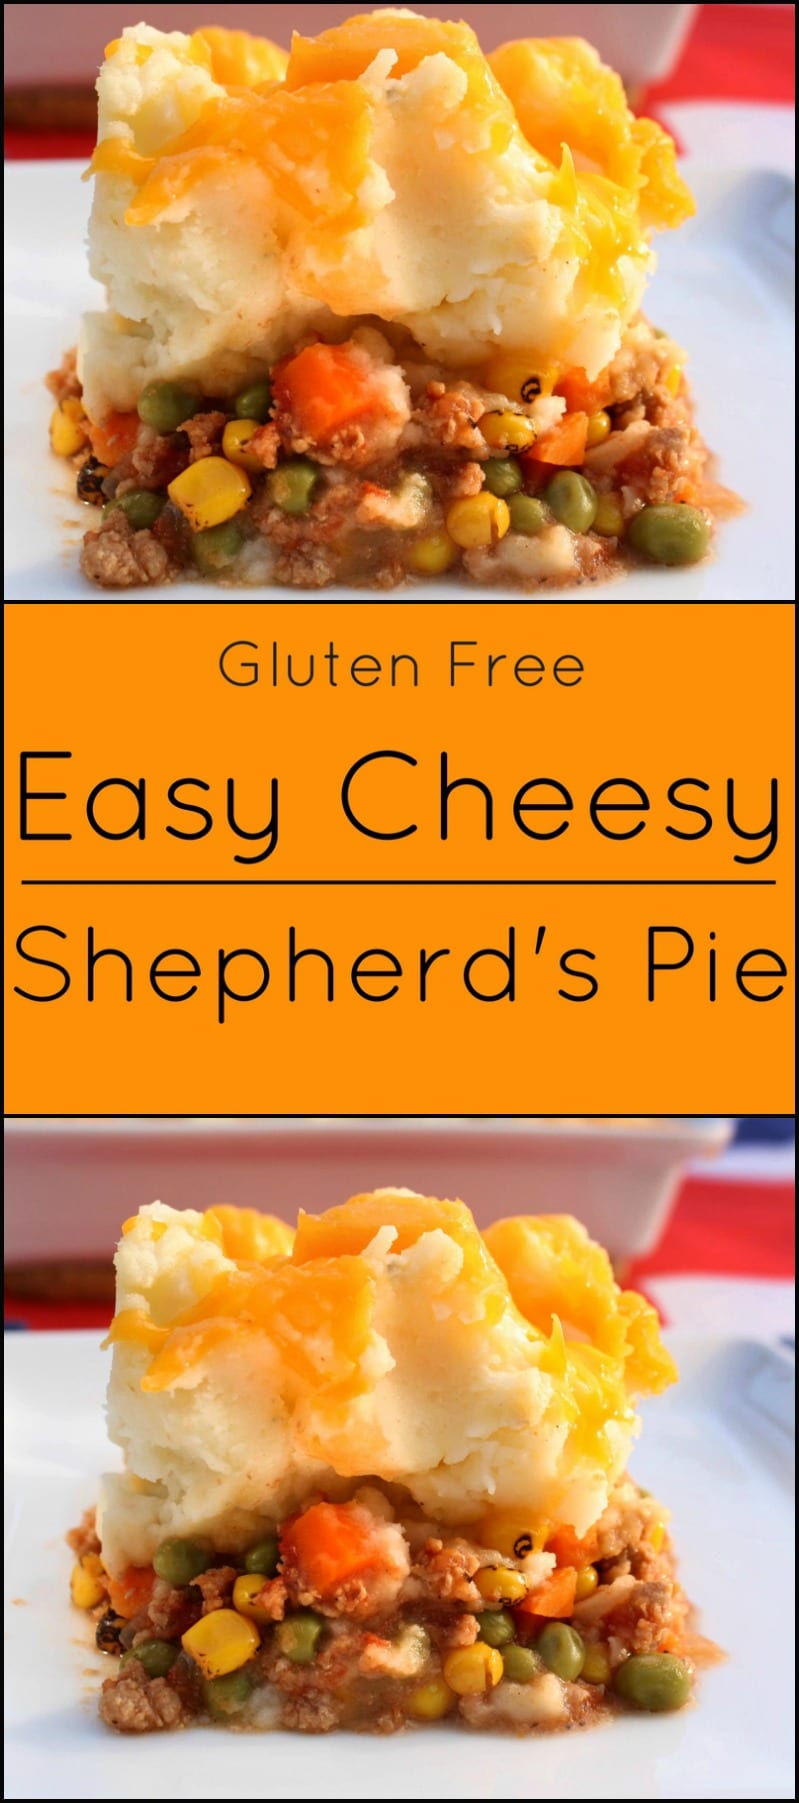 Easy, Cheesy Shepherd's Pie is a traditional British dish. Substitute ground beef or turkey for ground lamb. 